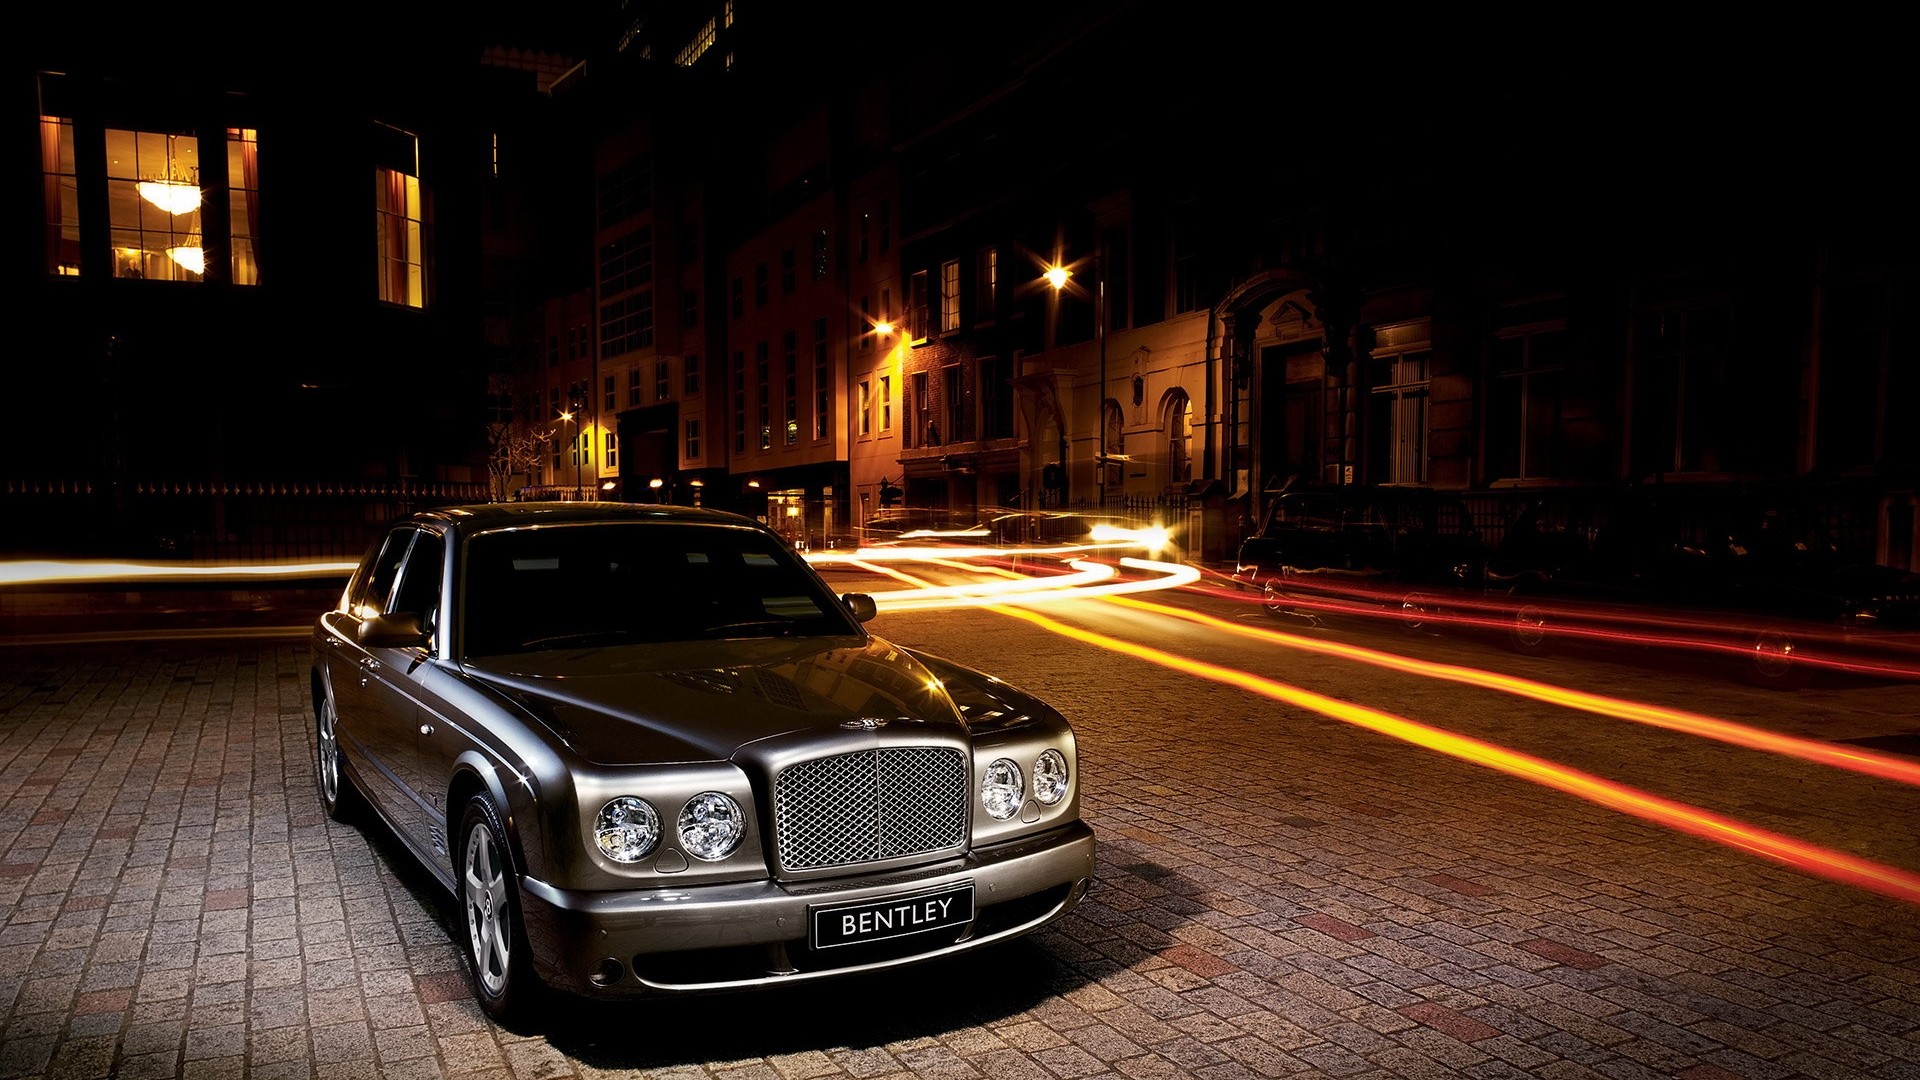 General 1920x1080 car Bentley night city long exposure light trails pavements gray cars British cars Volkswagen Group